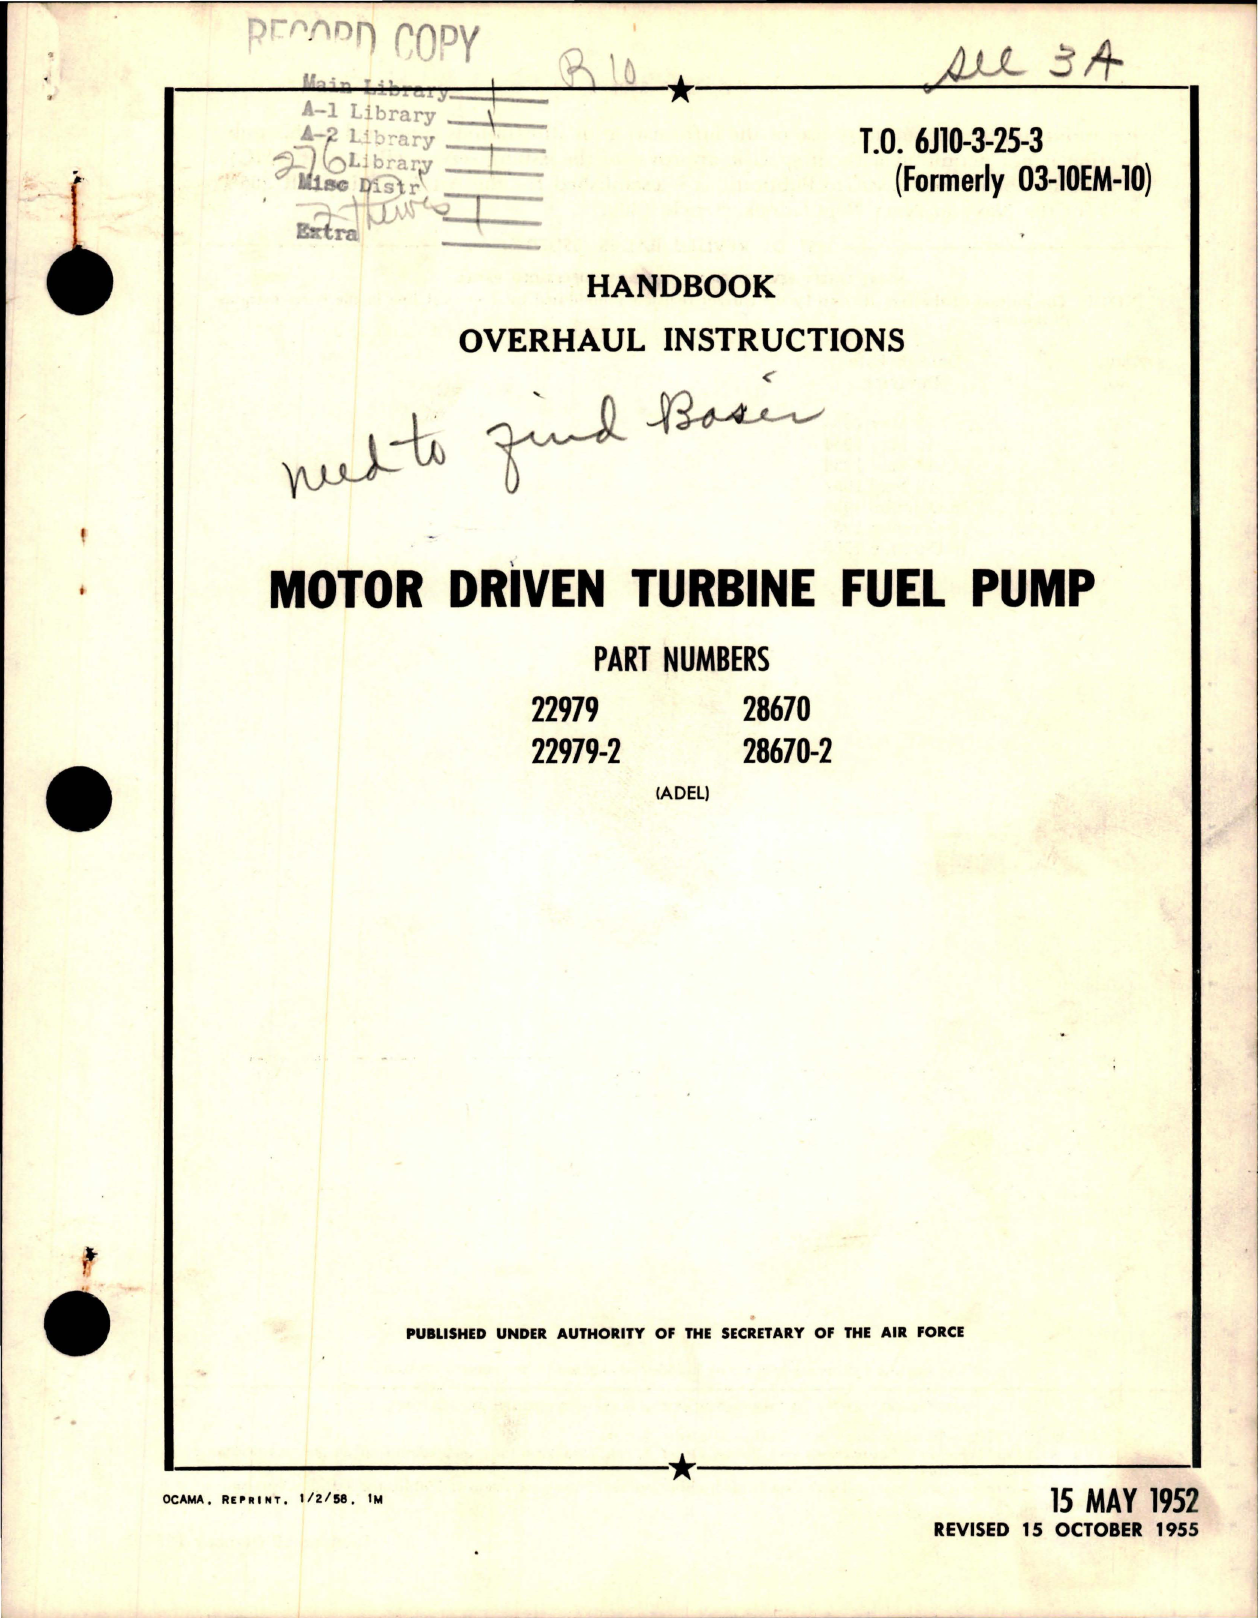 Sample page 1 from AirCorps Library document: Overhaul Instructions for Motor Driven Turbine Fuel Pump - Parts 22979, 22979-2, 28670, and 28670-2 